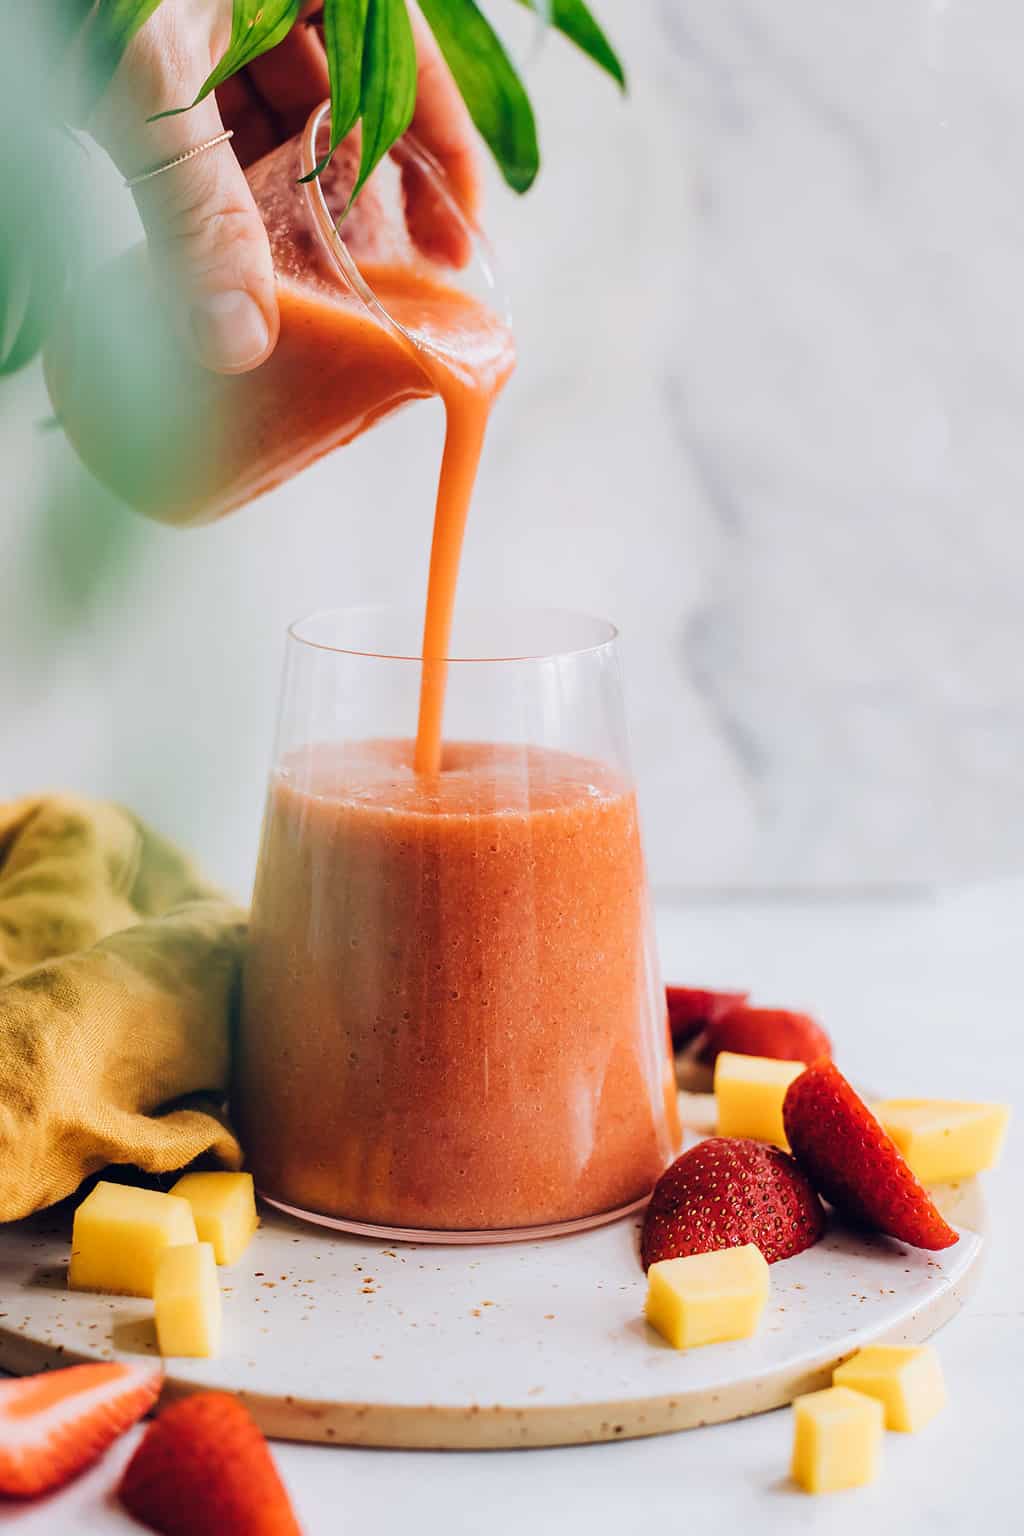 Rev Up Your Metabolism with This Fat-Burning Strawberry Mango Smoothie